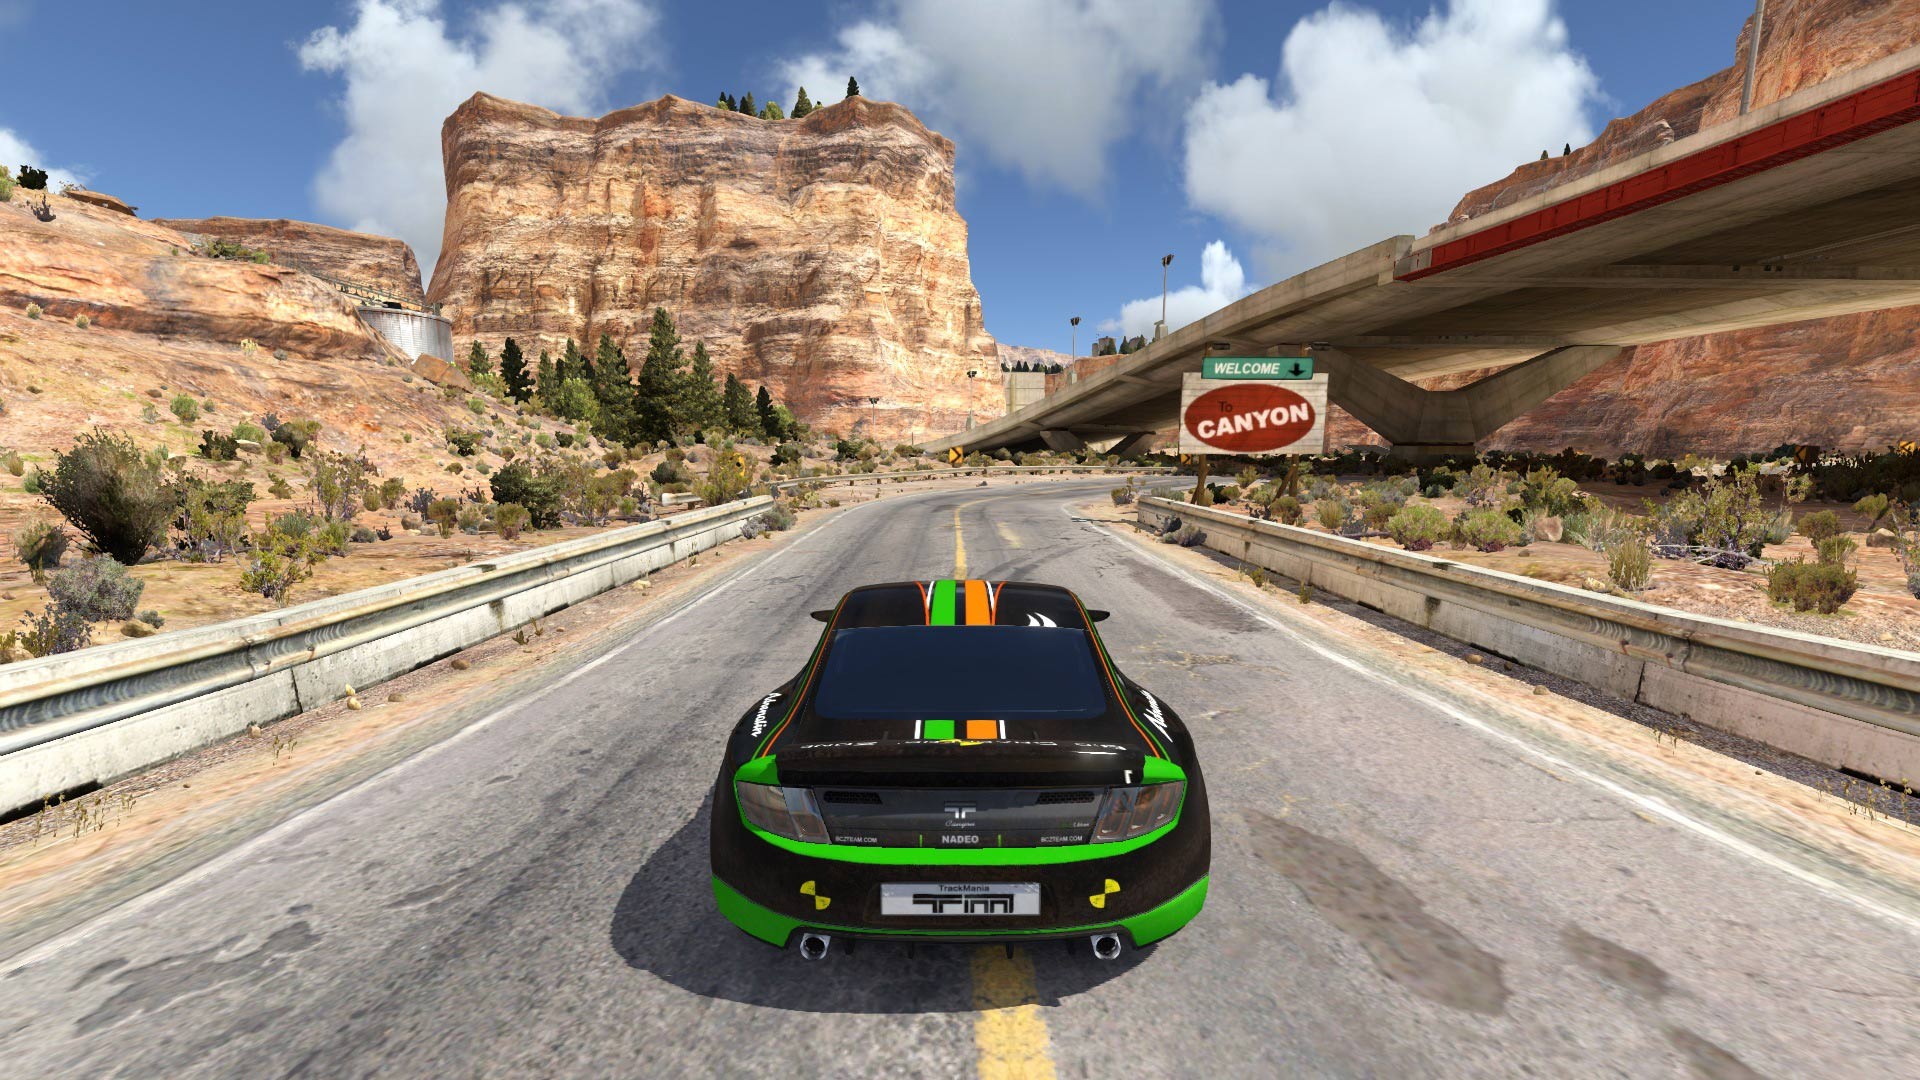 trackmania 2 canyon download for pc